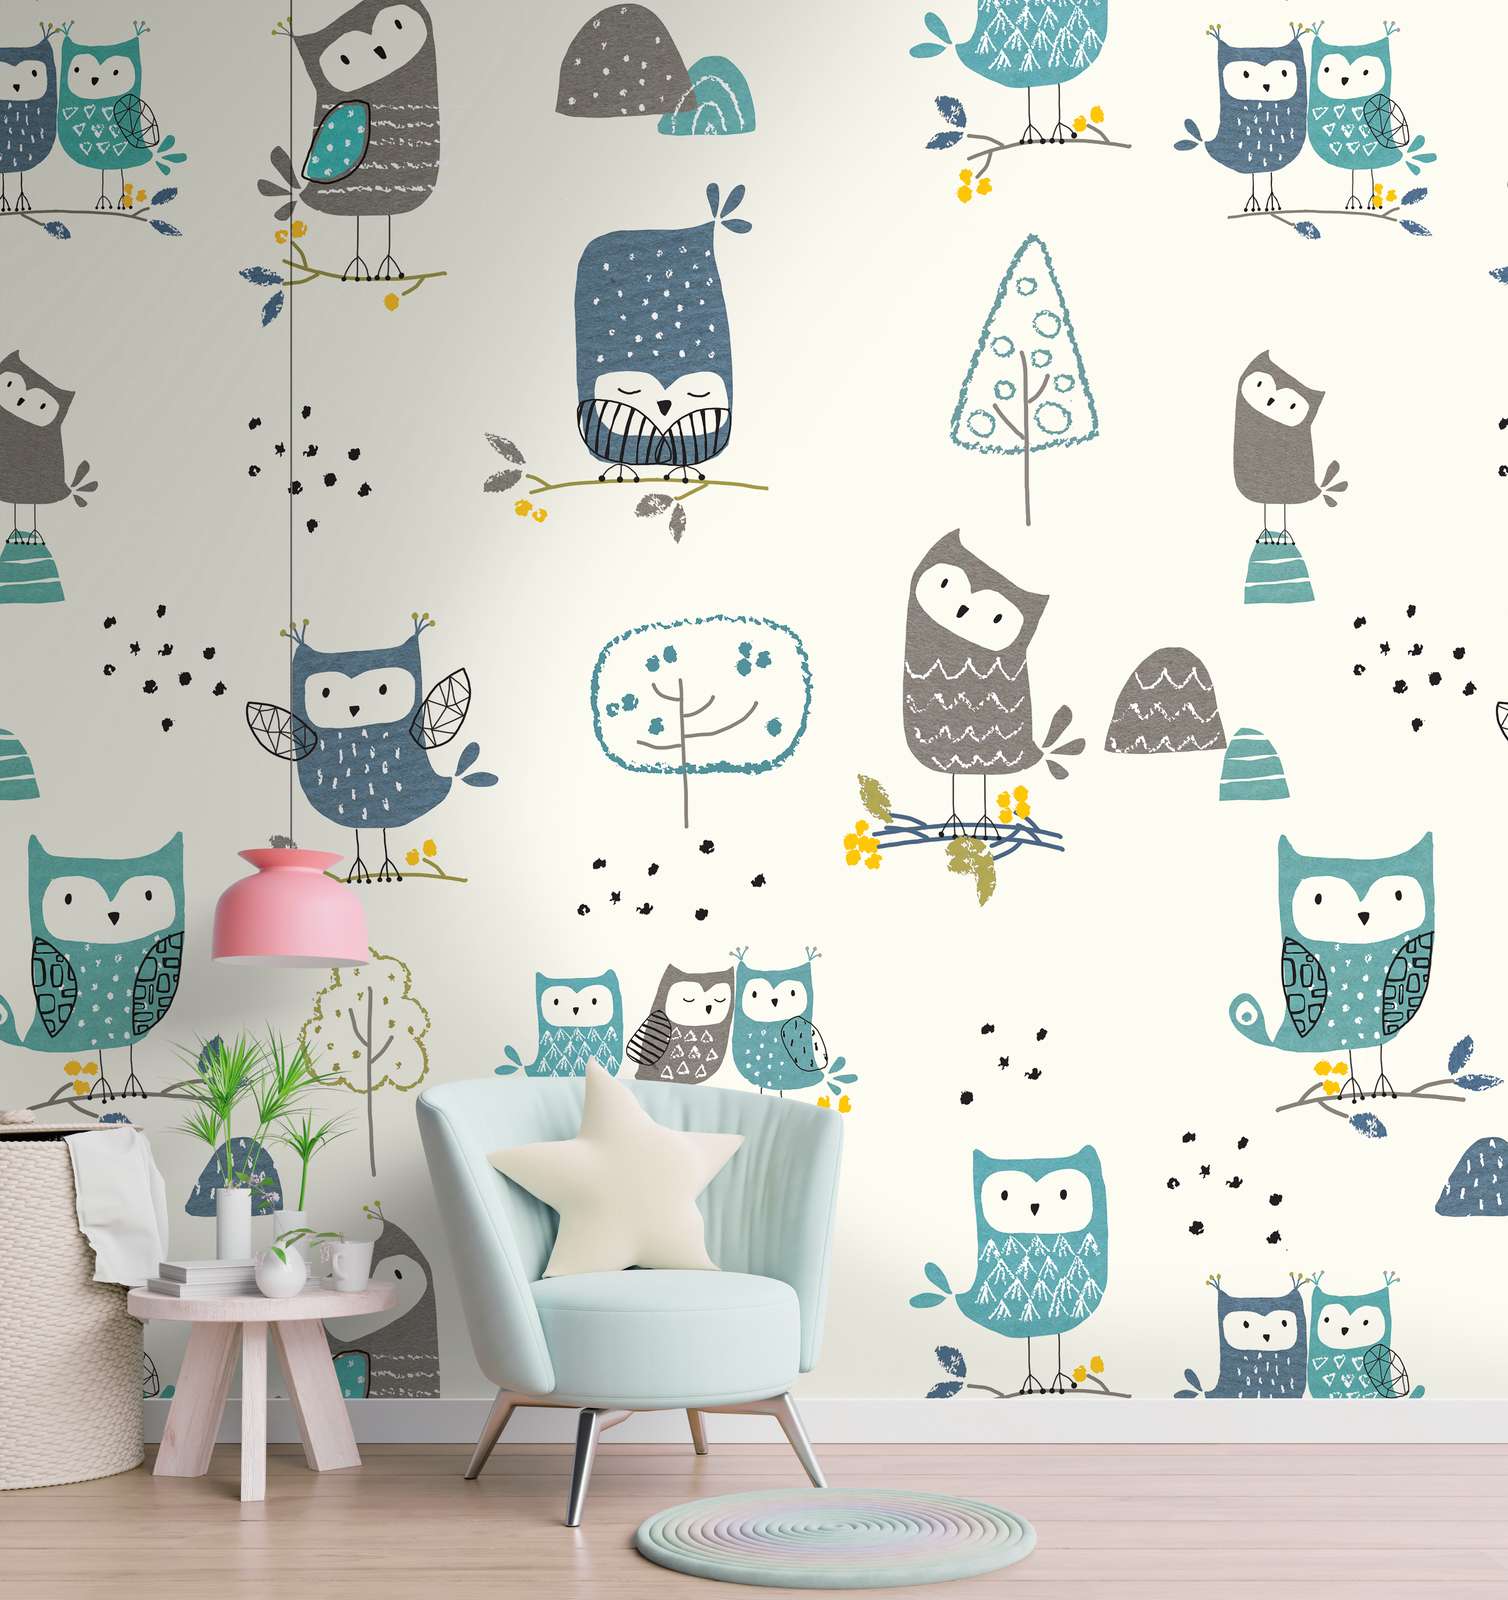             Kids non-woven wallpaper with owls and trees - colourful, cream, blue
        